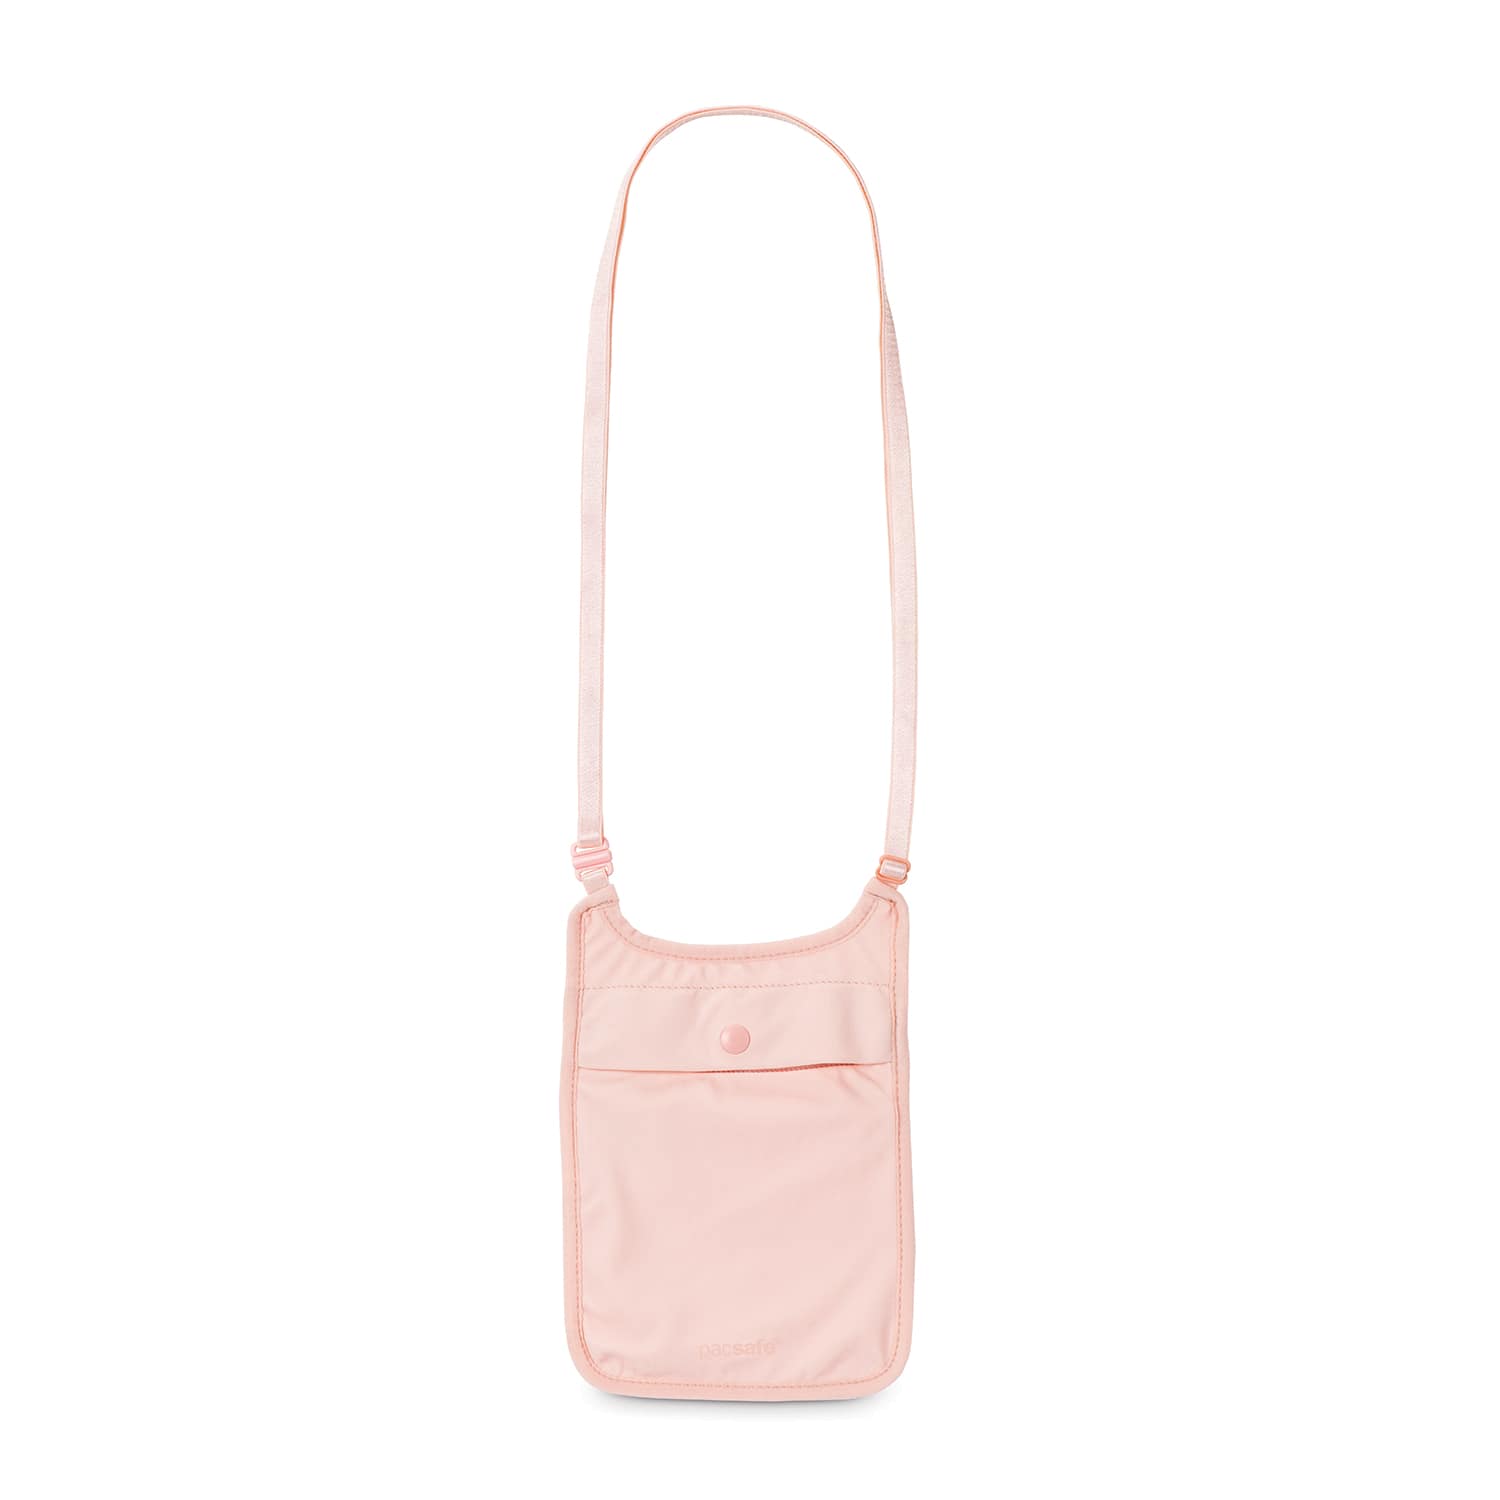 Coversafe S75 Secret Travel Neck Pouch, Orchid Pink